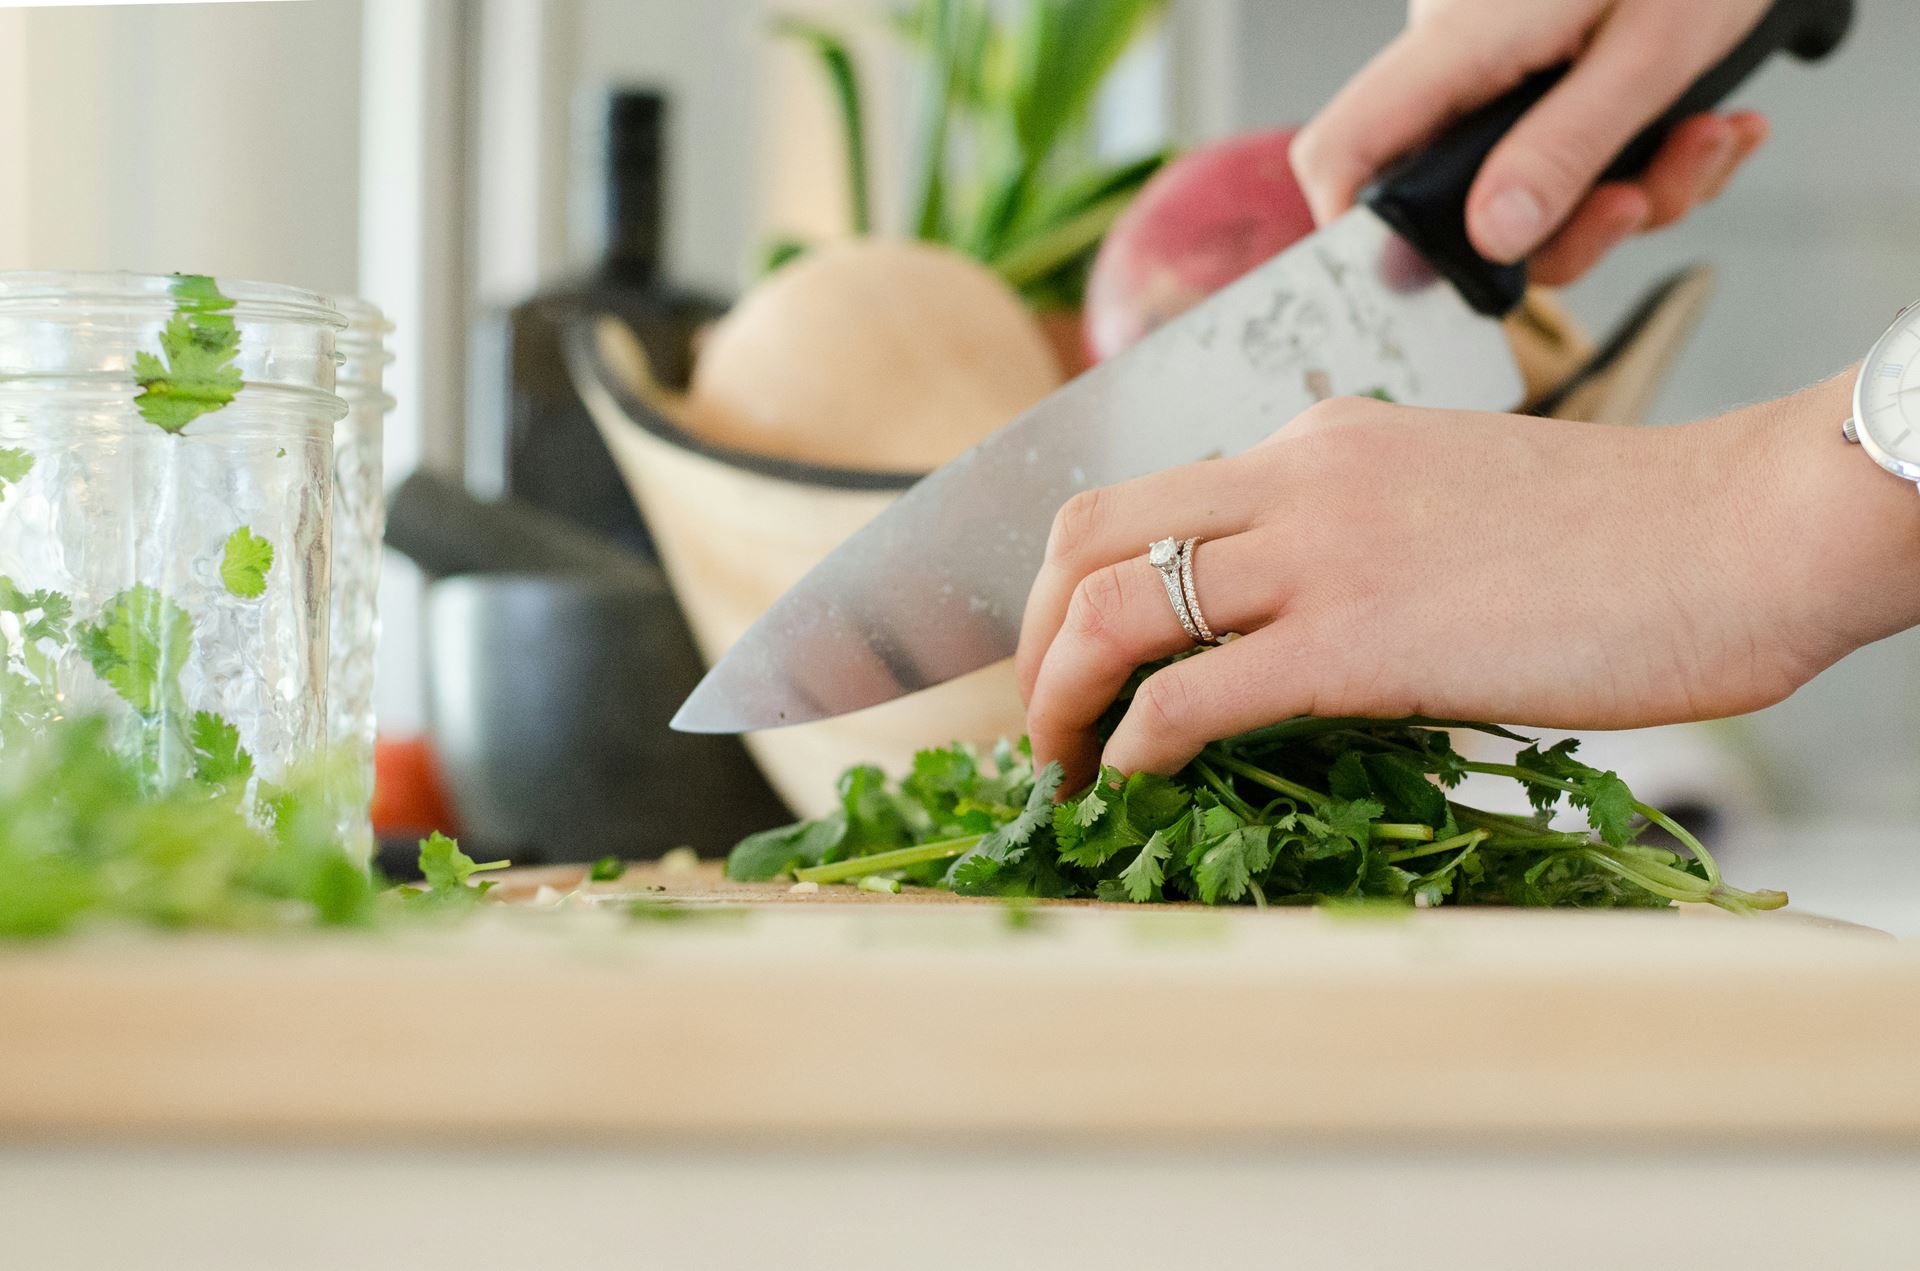 A person in a kitchen cutting up vegetable with a chopping knife